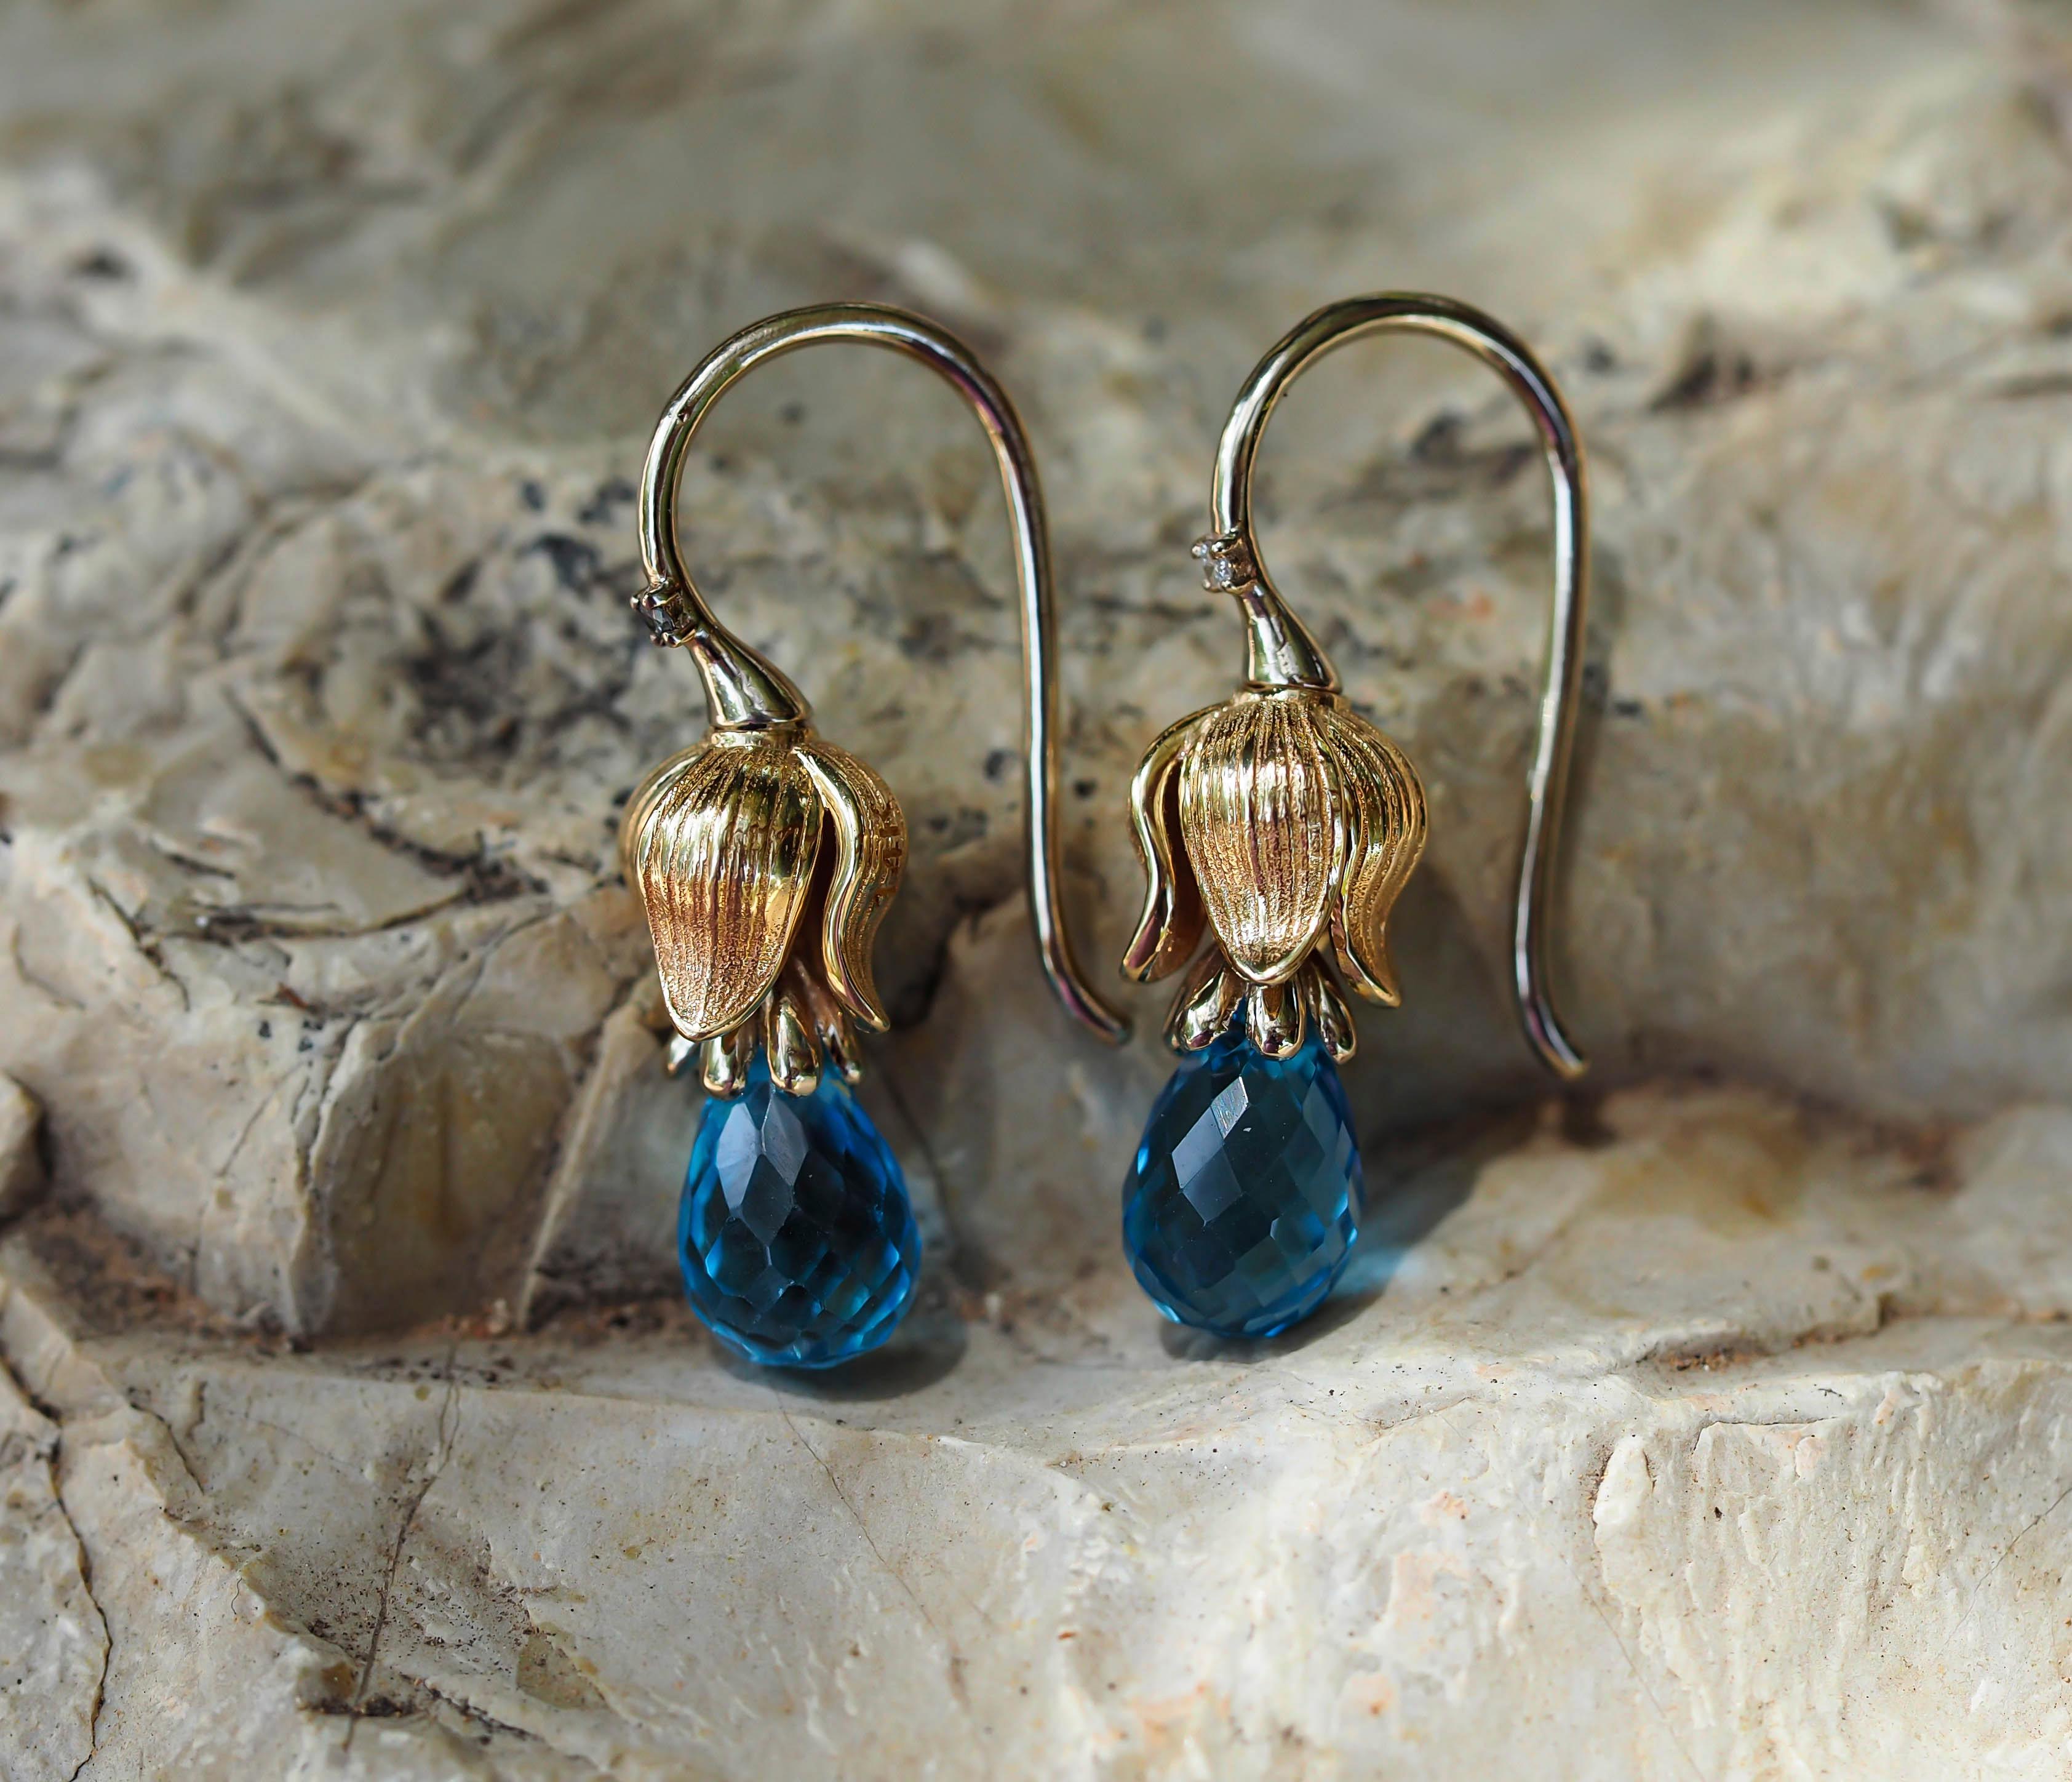 Lily flower earrings with Topazes, diamonds. 
Briolette topazes earrings. Drop blue topaz earrings. Statement earrings. Plant gold earrings.

Gold color yellow and white - 14k marked
Weight: - 3.25 g.
Size: 21x6mm.

Topazes 2 pieces - sky blue